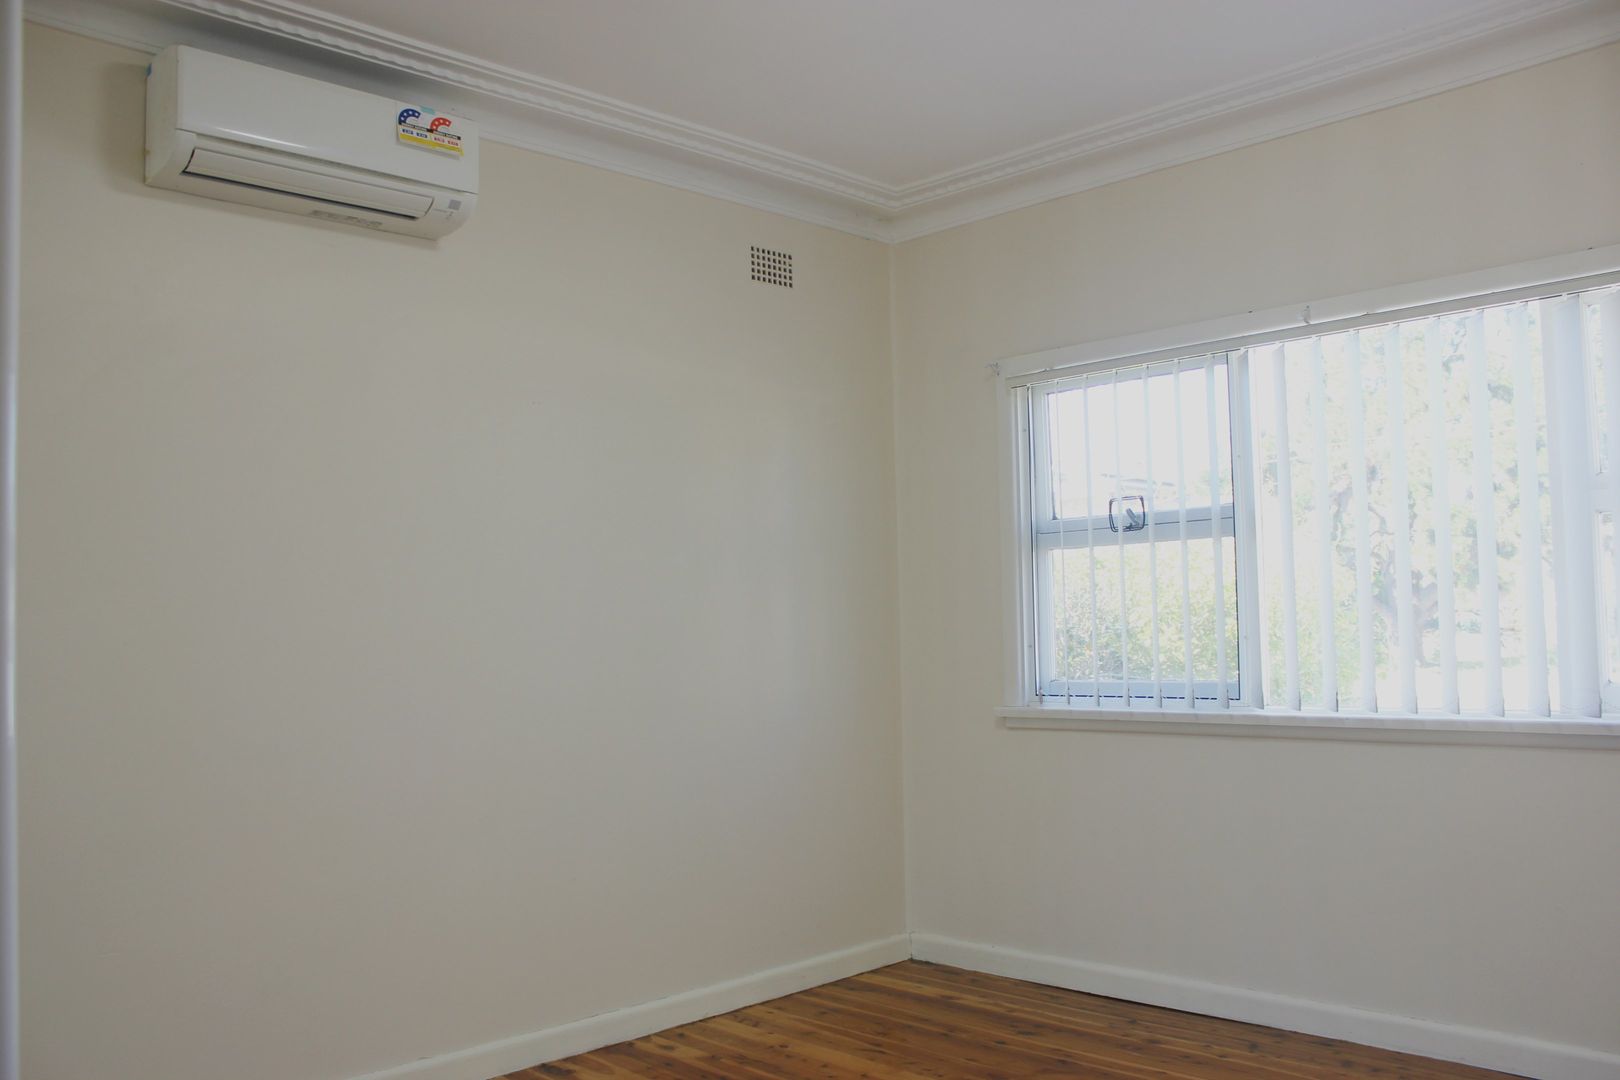 97 EARL ST., Canley Heights NSW 2166, Image 2